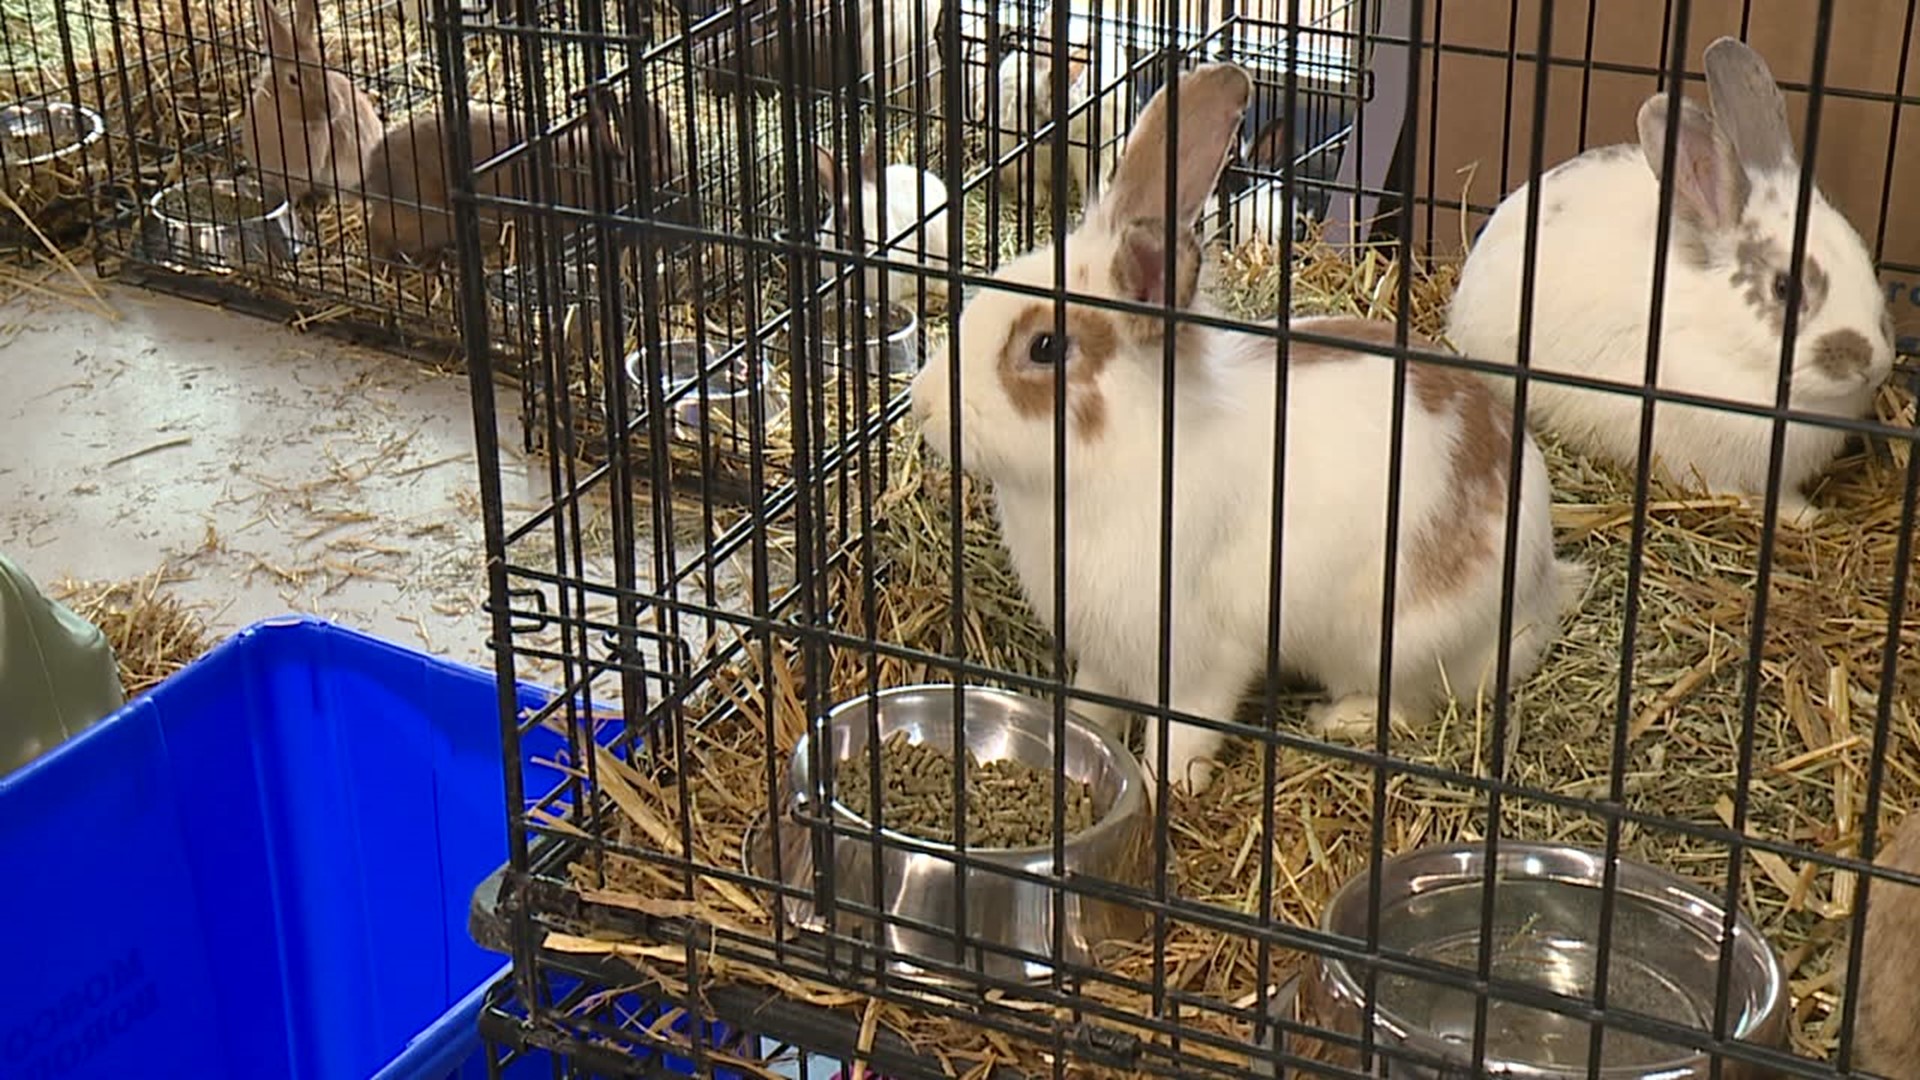 The Lackawanna County humane officer says the rabbits were taken from a home near Moscow and are being cared for at Griffin Pond Animal Shelter.